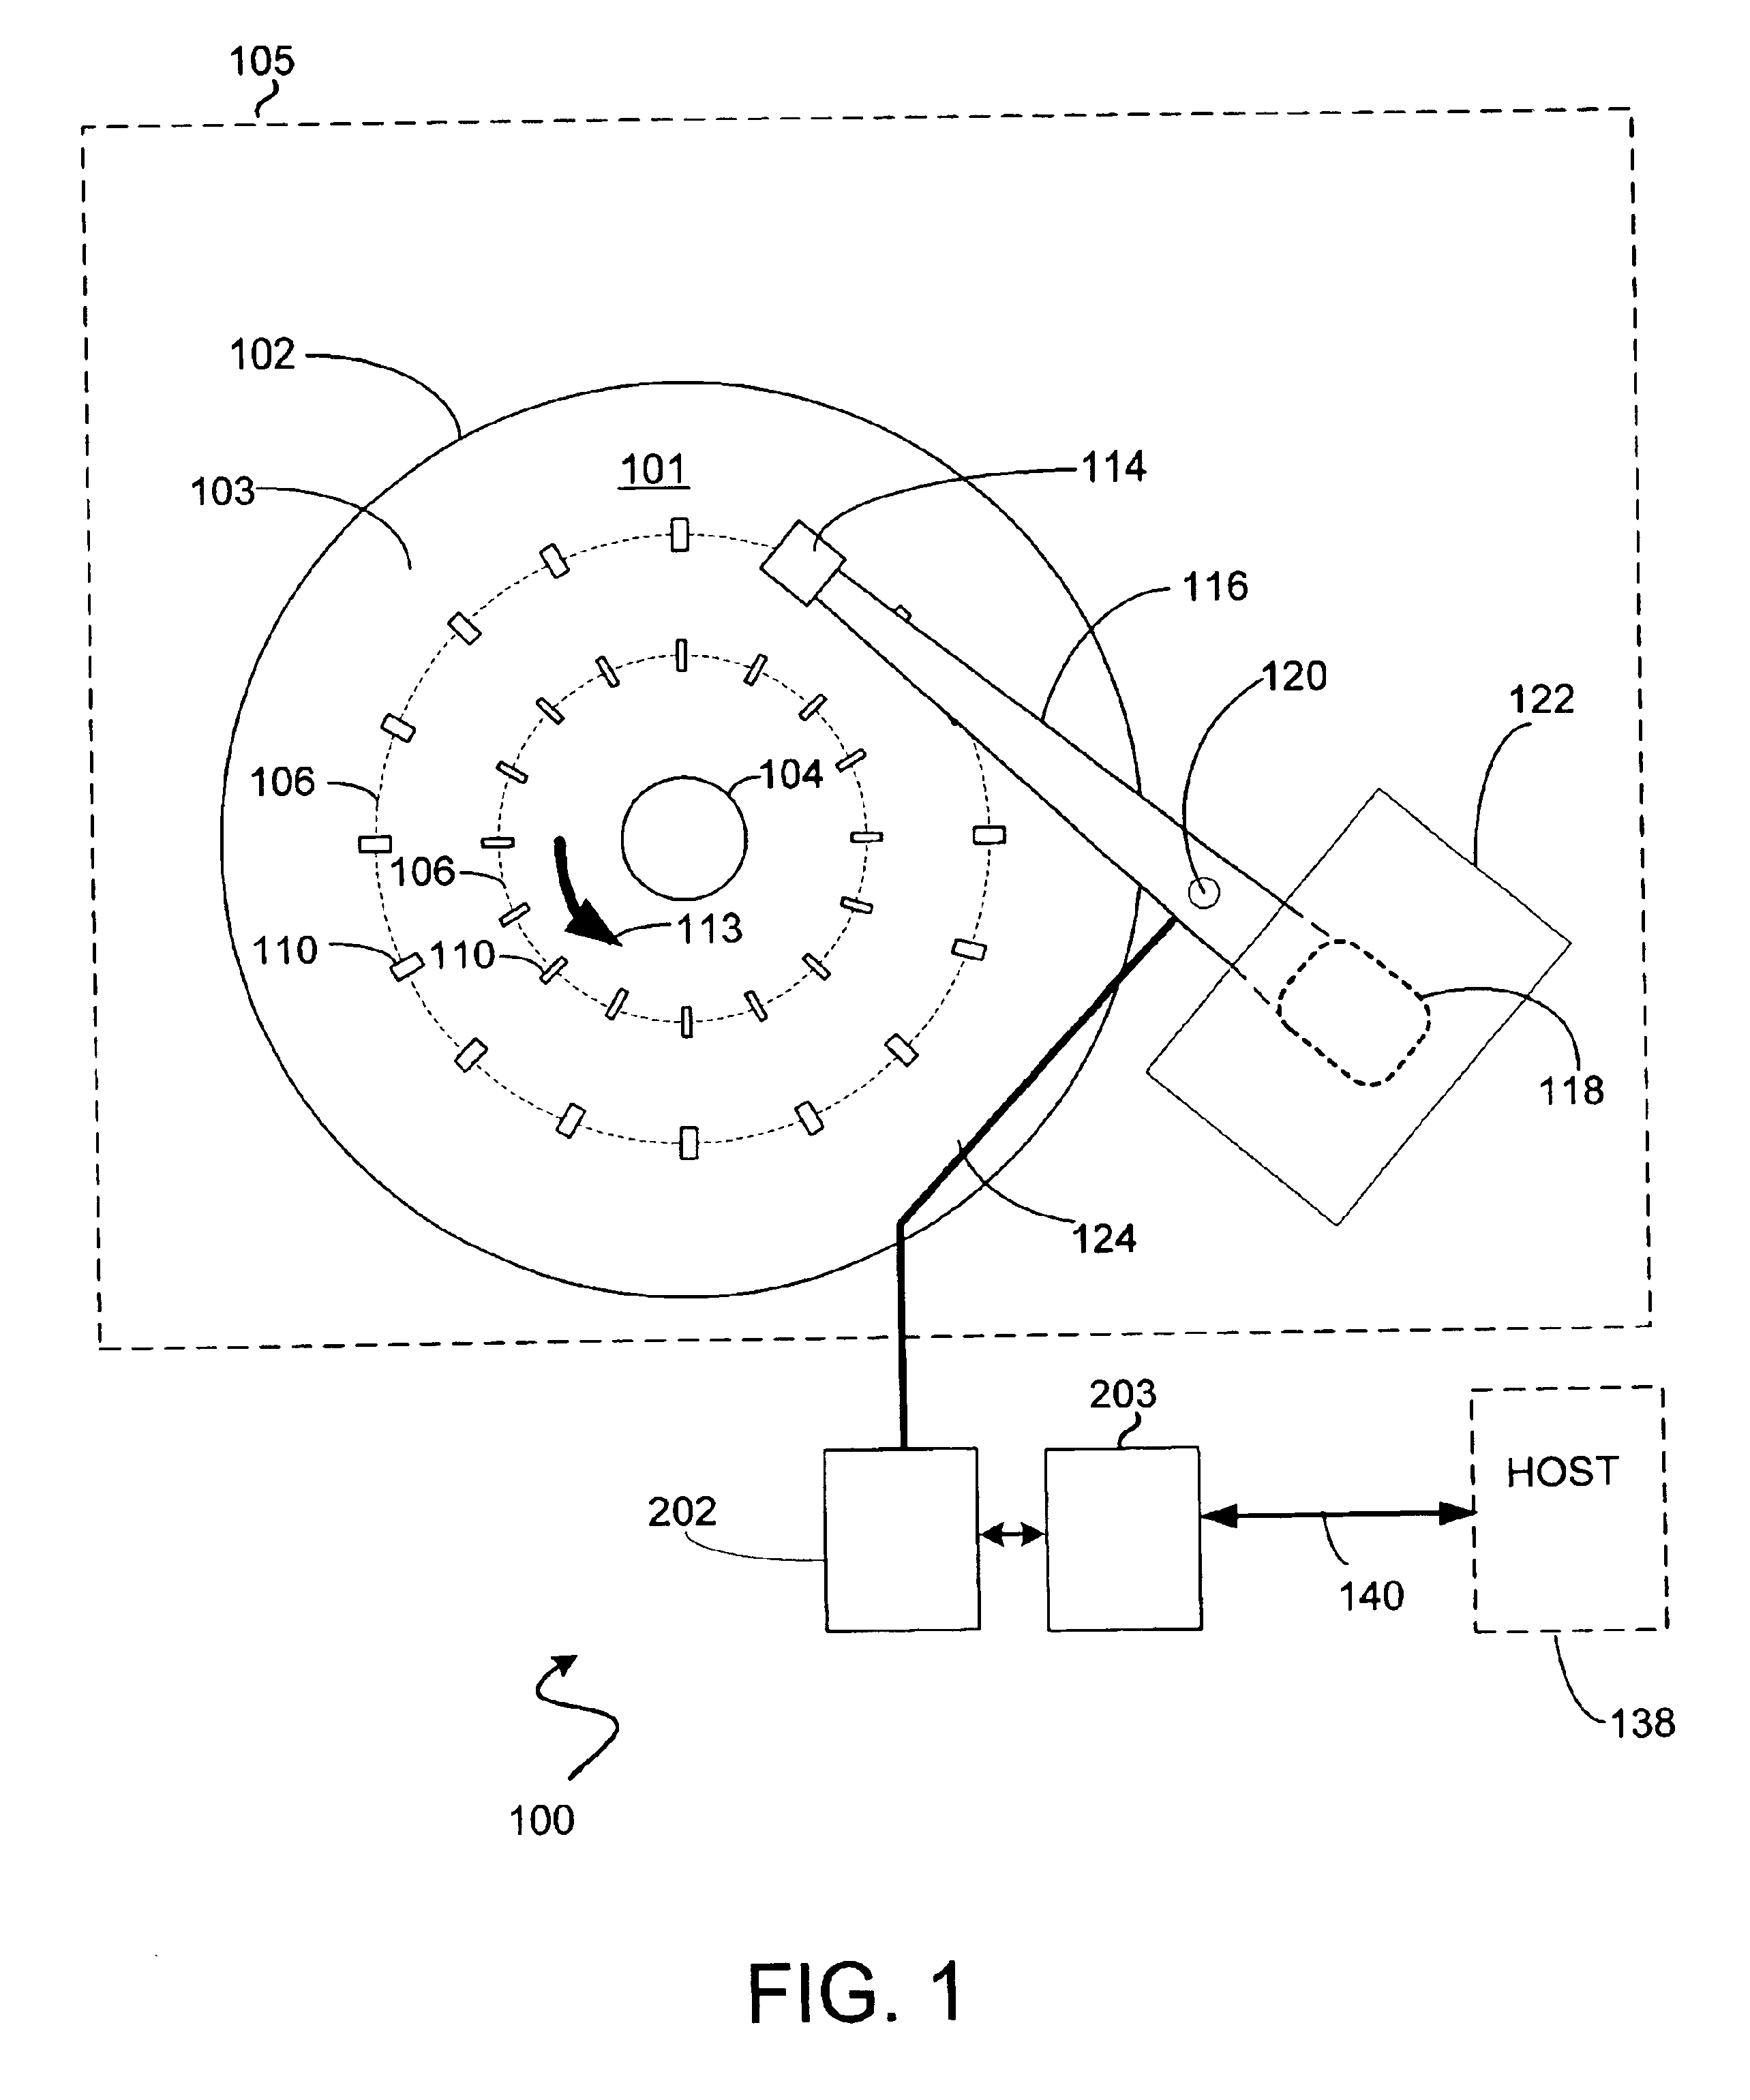 Performance of a rotary actuator in a disk drive